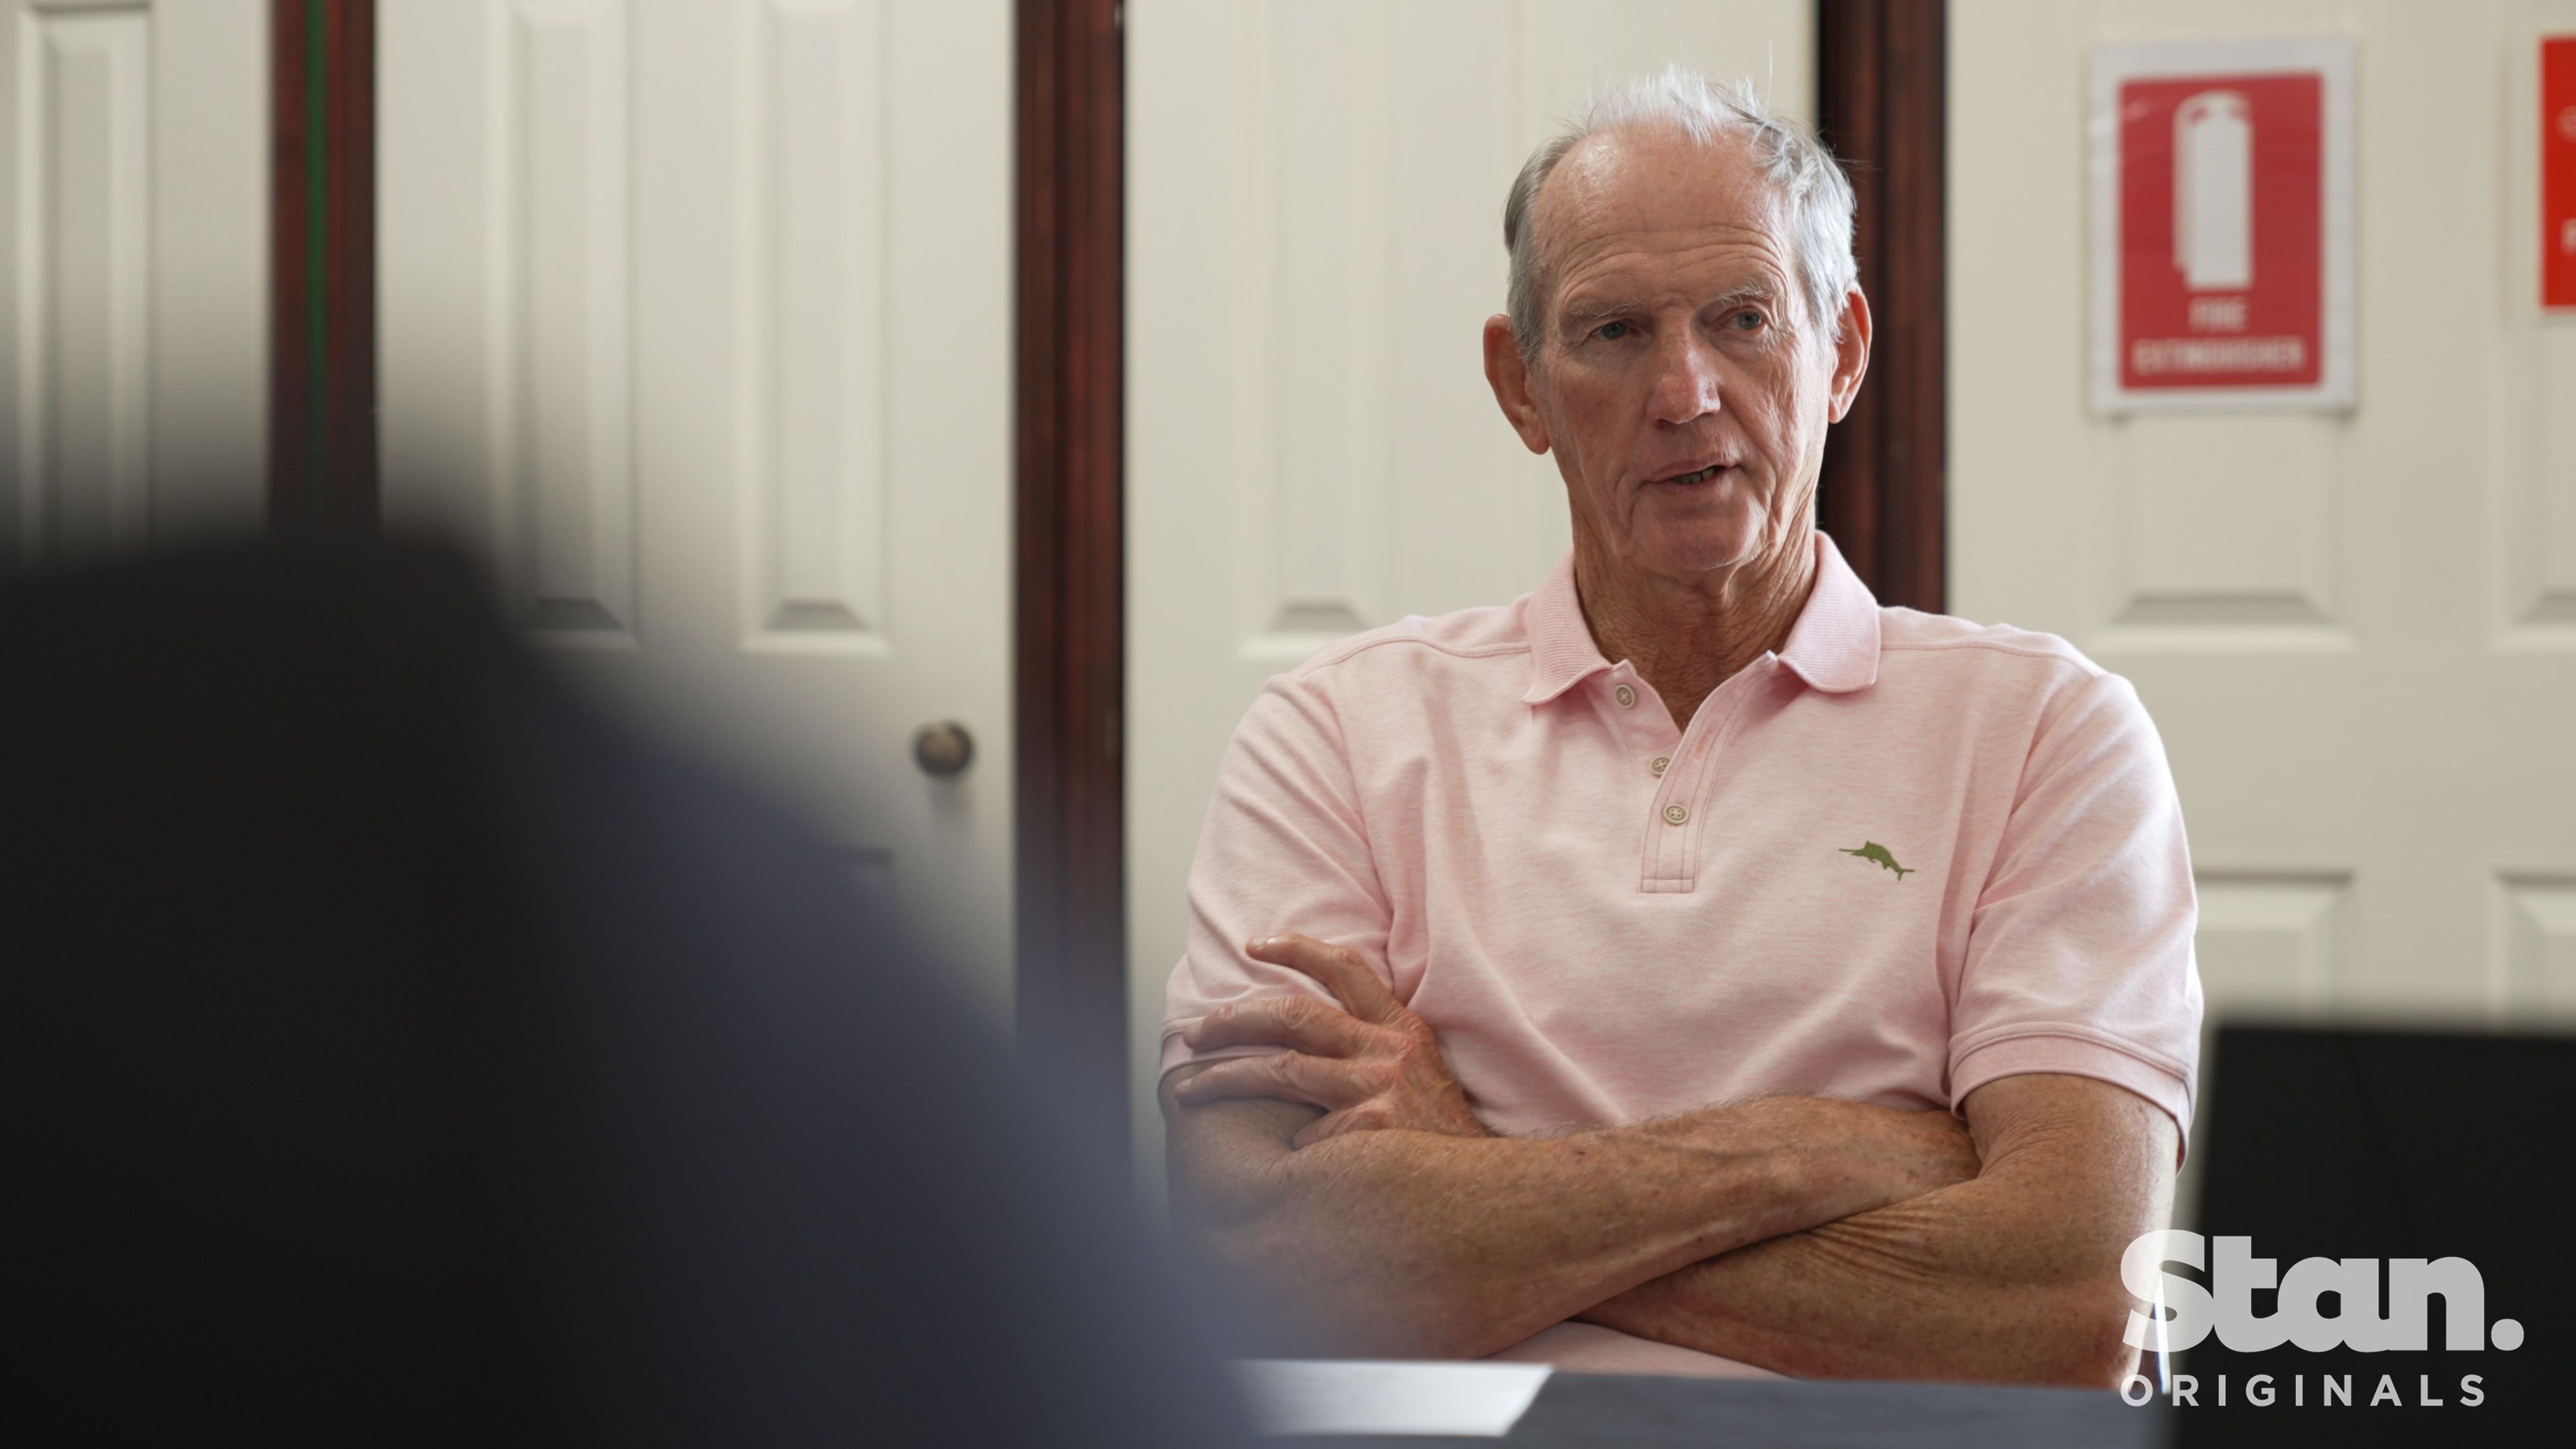 'All my life I've fought it': Wayne Bennett opens up in raw documentary footage